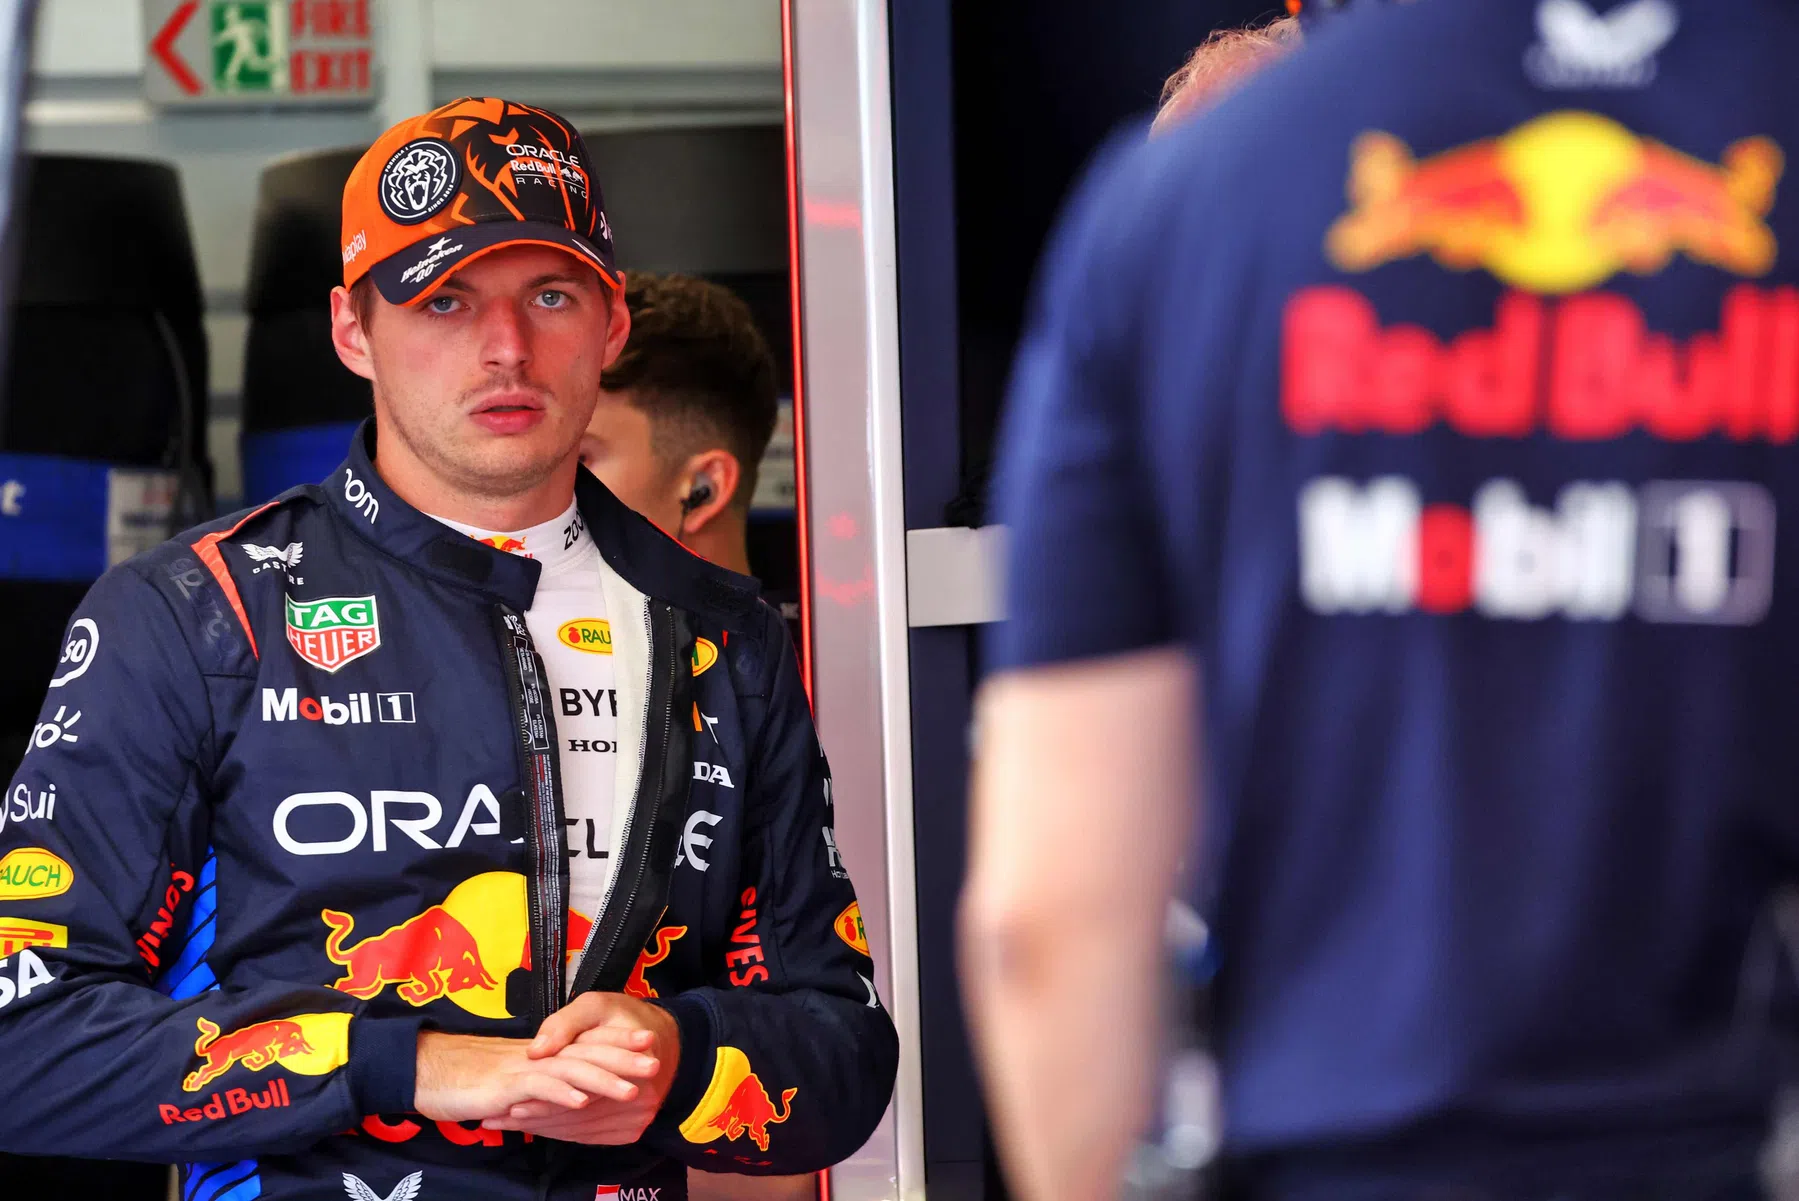 Verstappen tested old car ahead of Spain, here's why